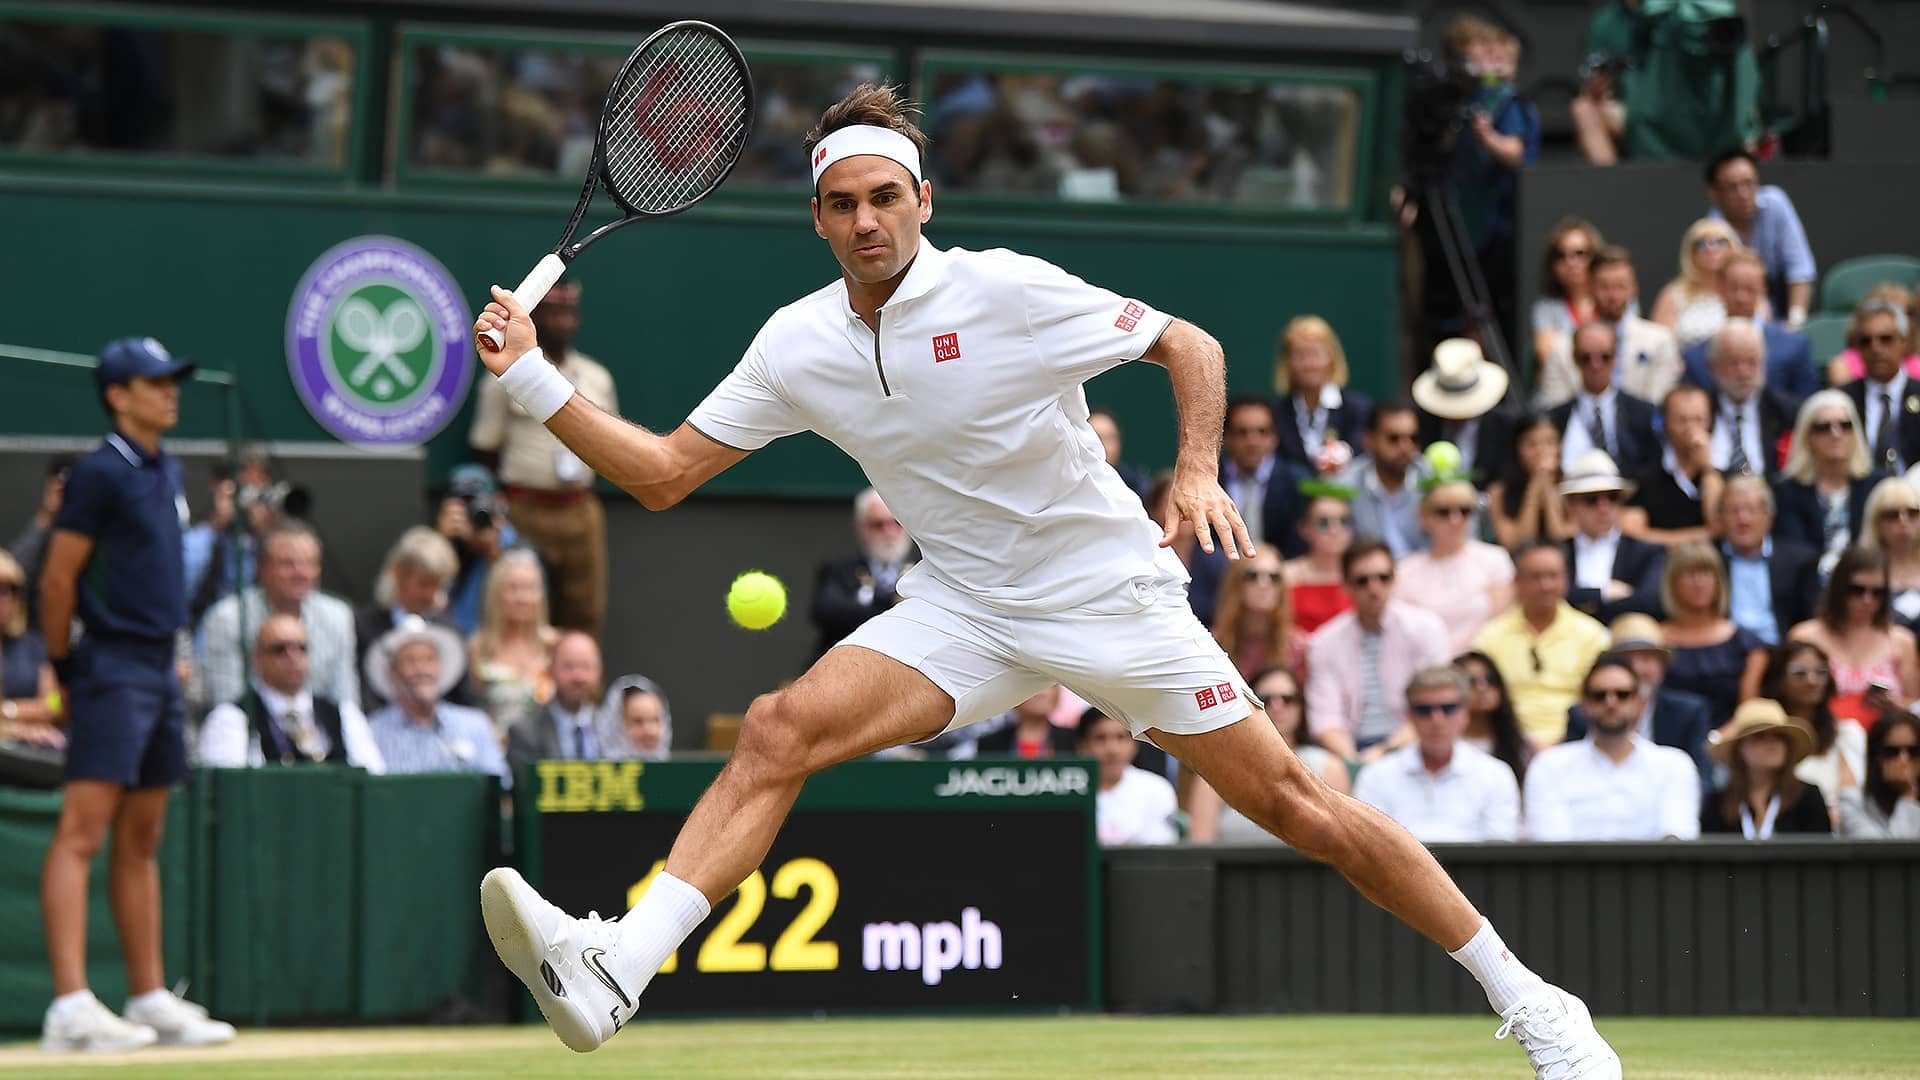 Eight-time champion Roger Federer has been placed in the same quarter of the 2021 Wimbledon draw as Daniil Medvedev.